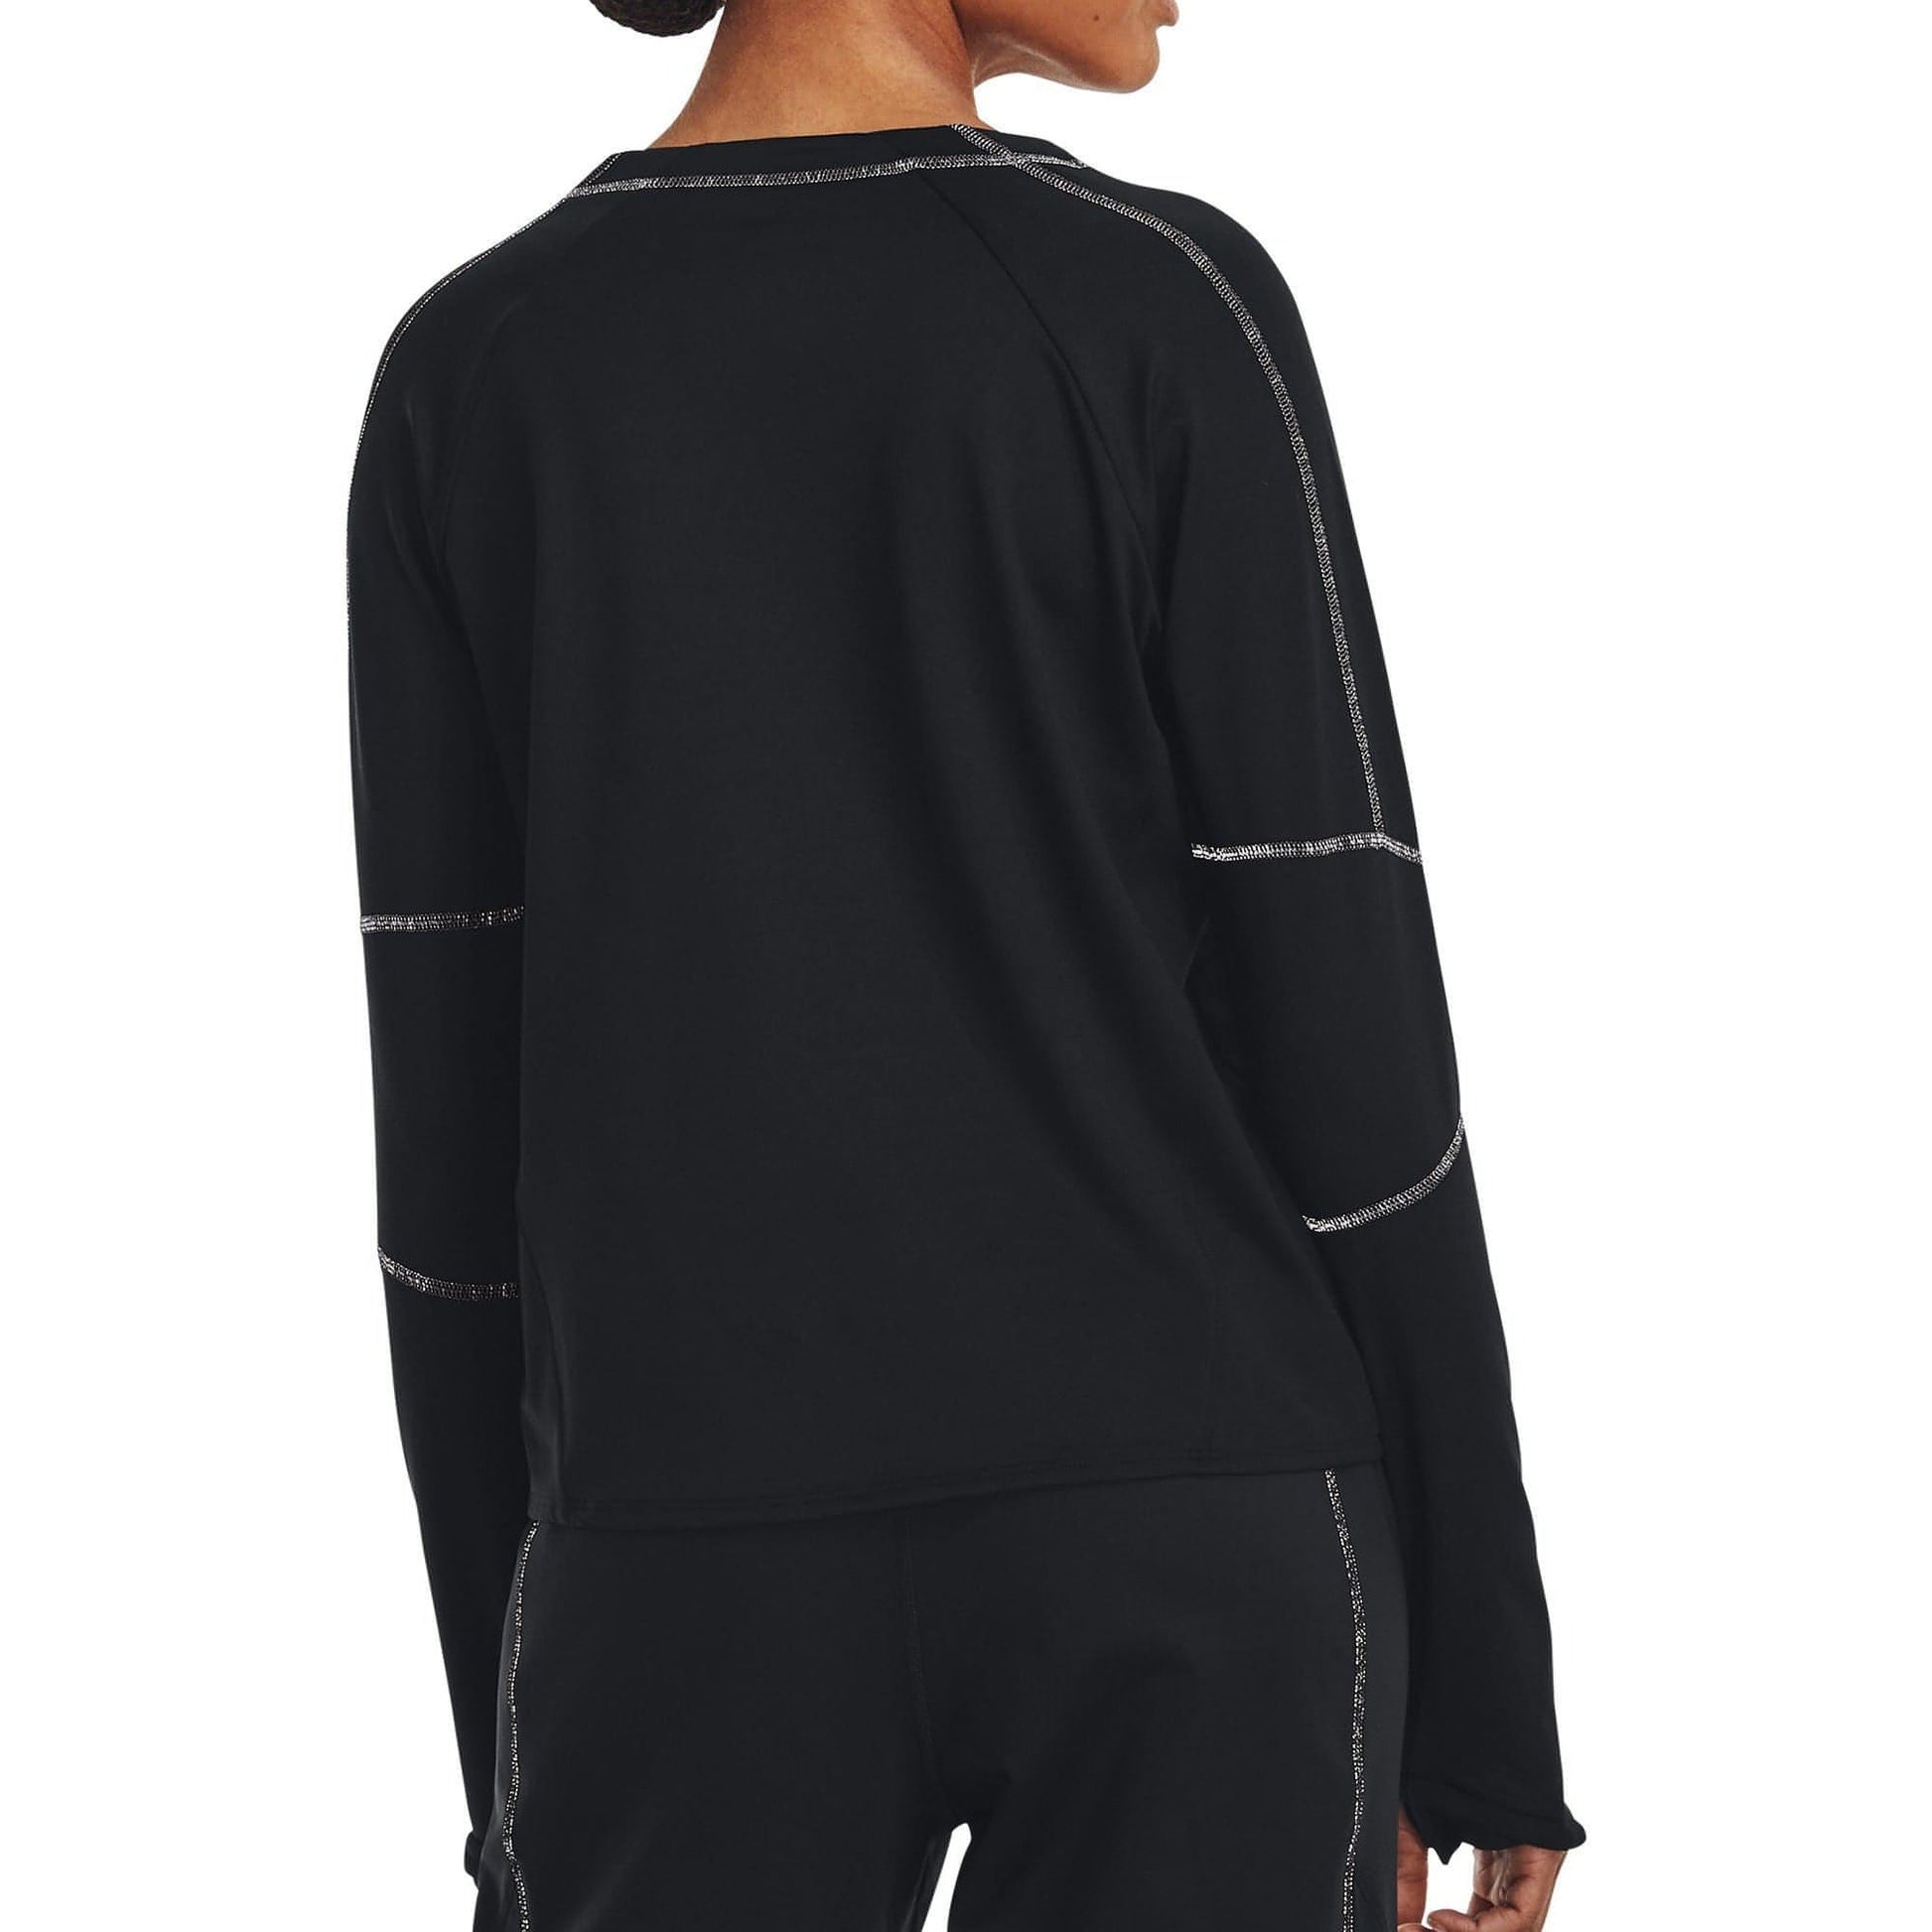 Under Armour Cold Weather Crew Sweatshirt Back View